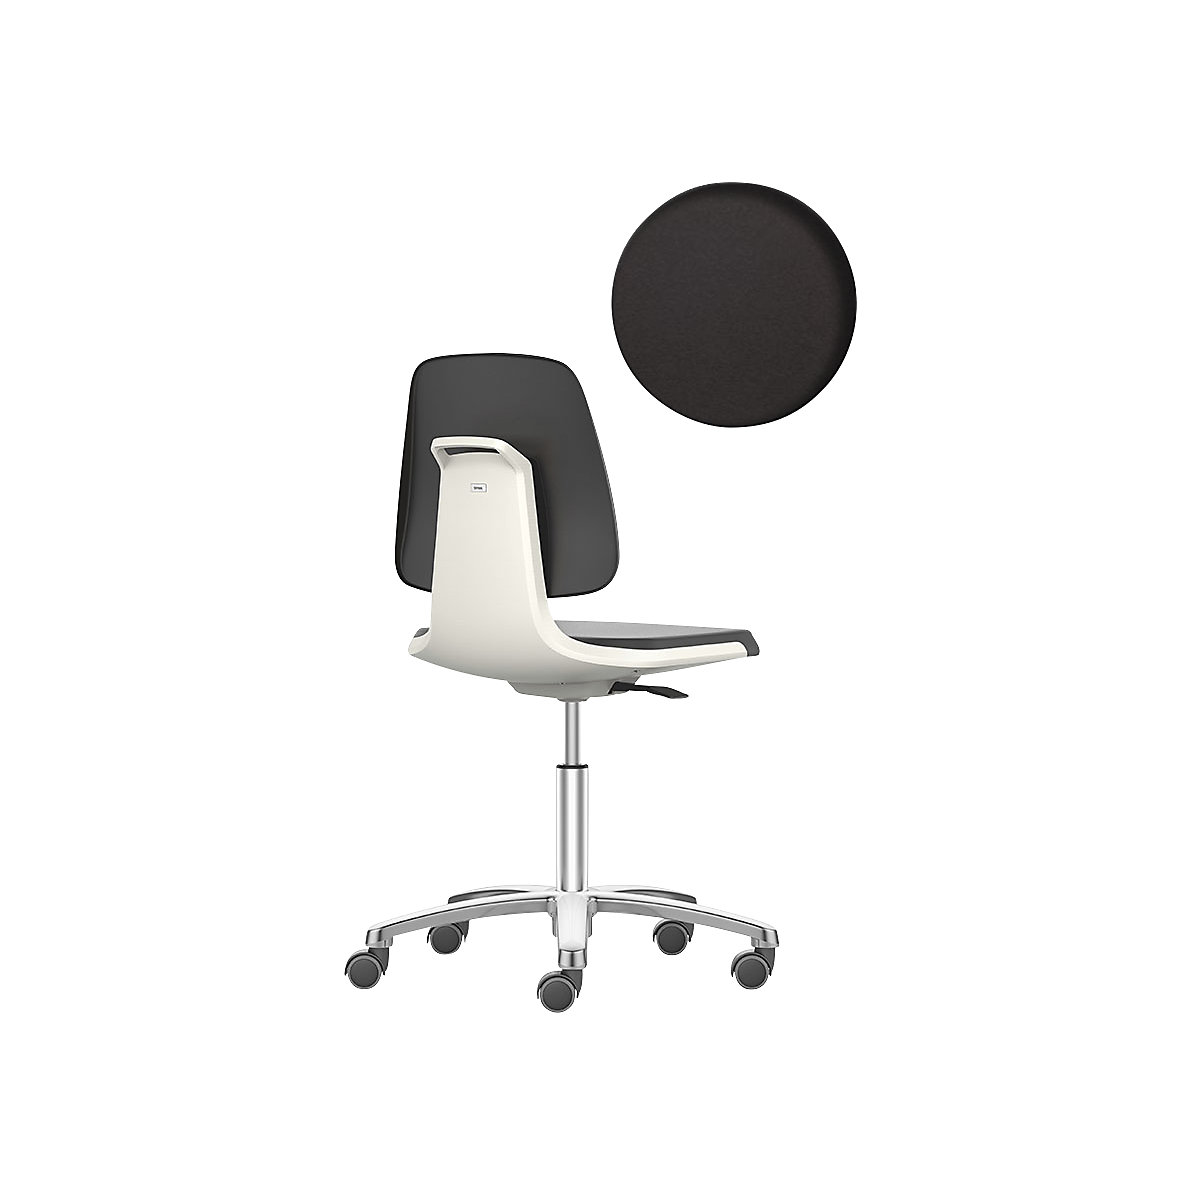 LABSIT industrial swivel chair – bimos, five-star base with castors, vinyl upholstered seat, white-22